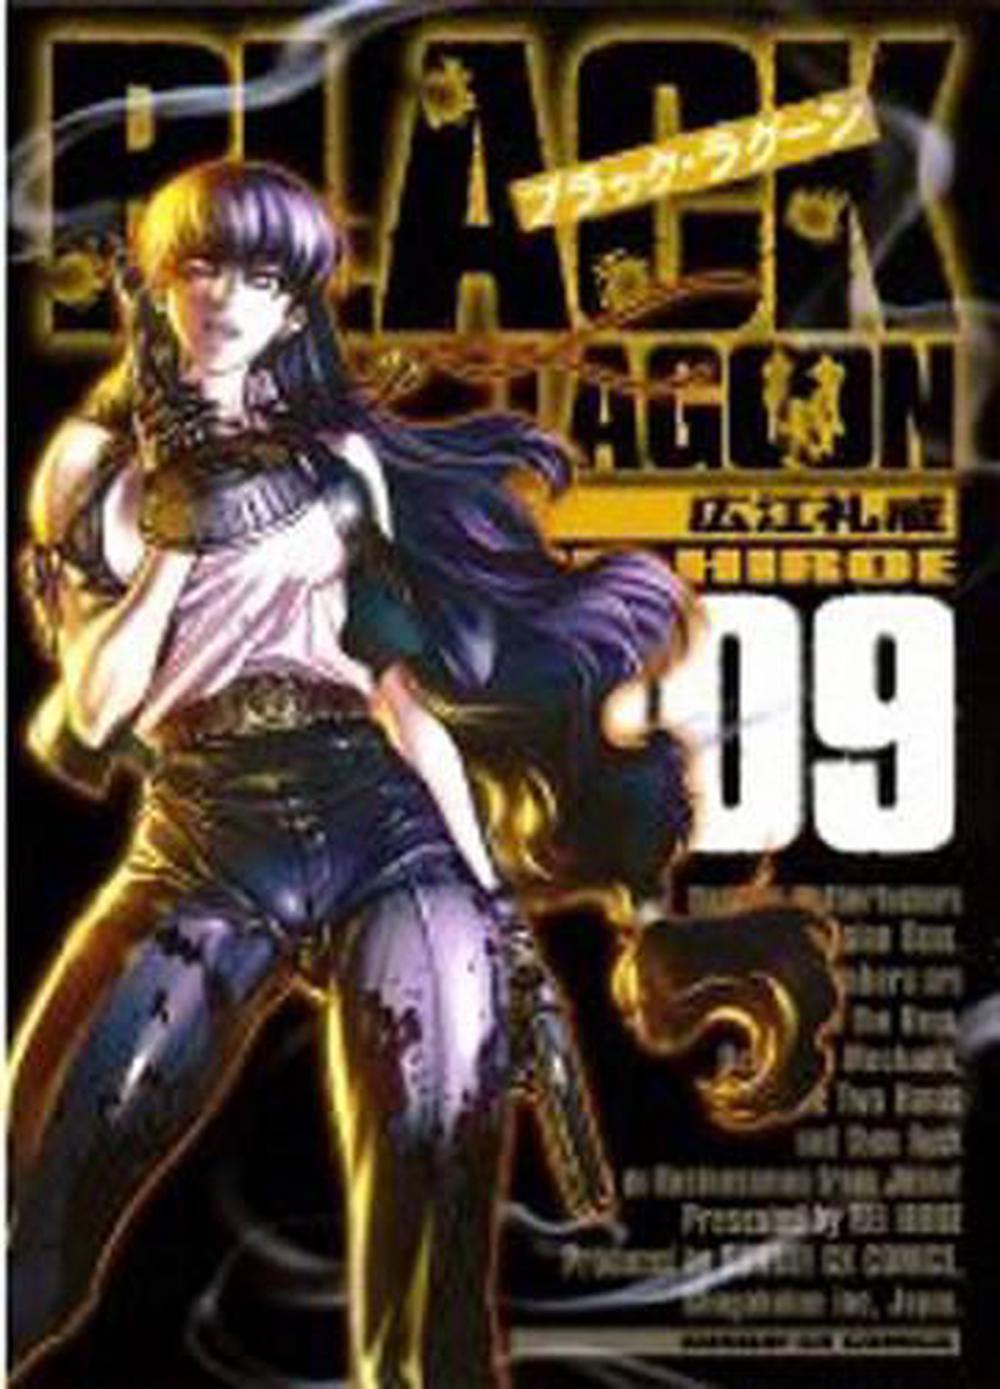 Black Lagoon Volume 9 By Rei Hiroe Paperback Buy Online At The Nile